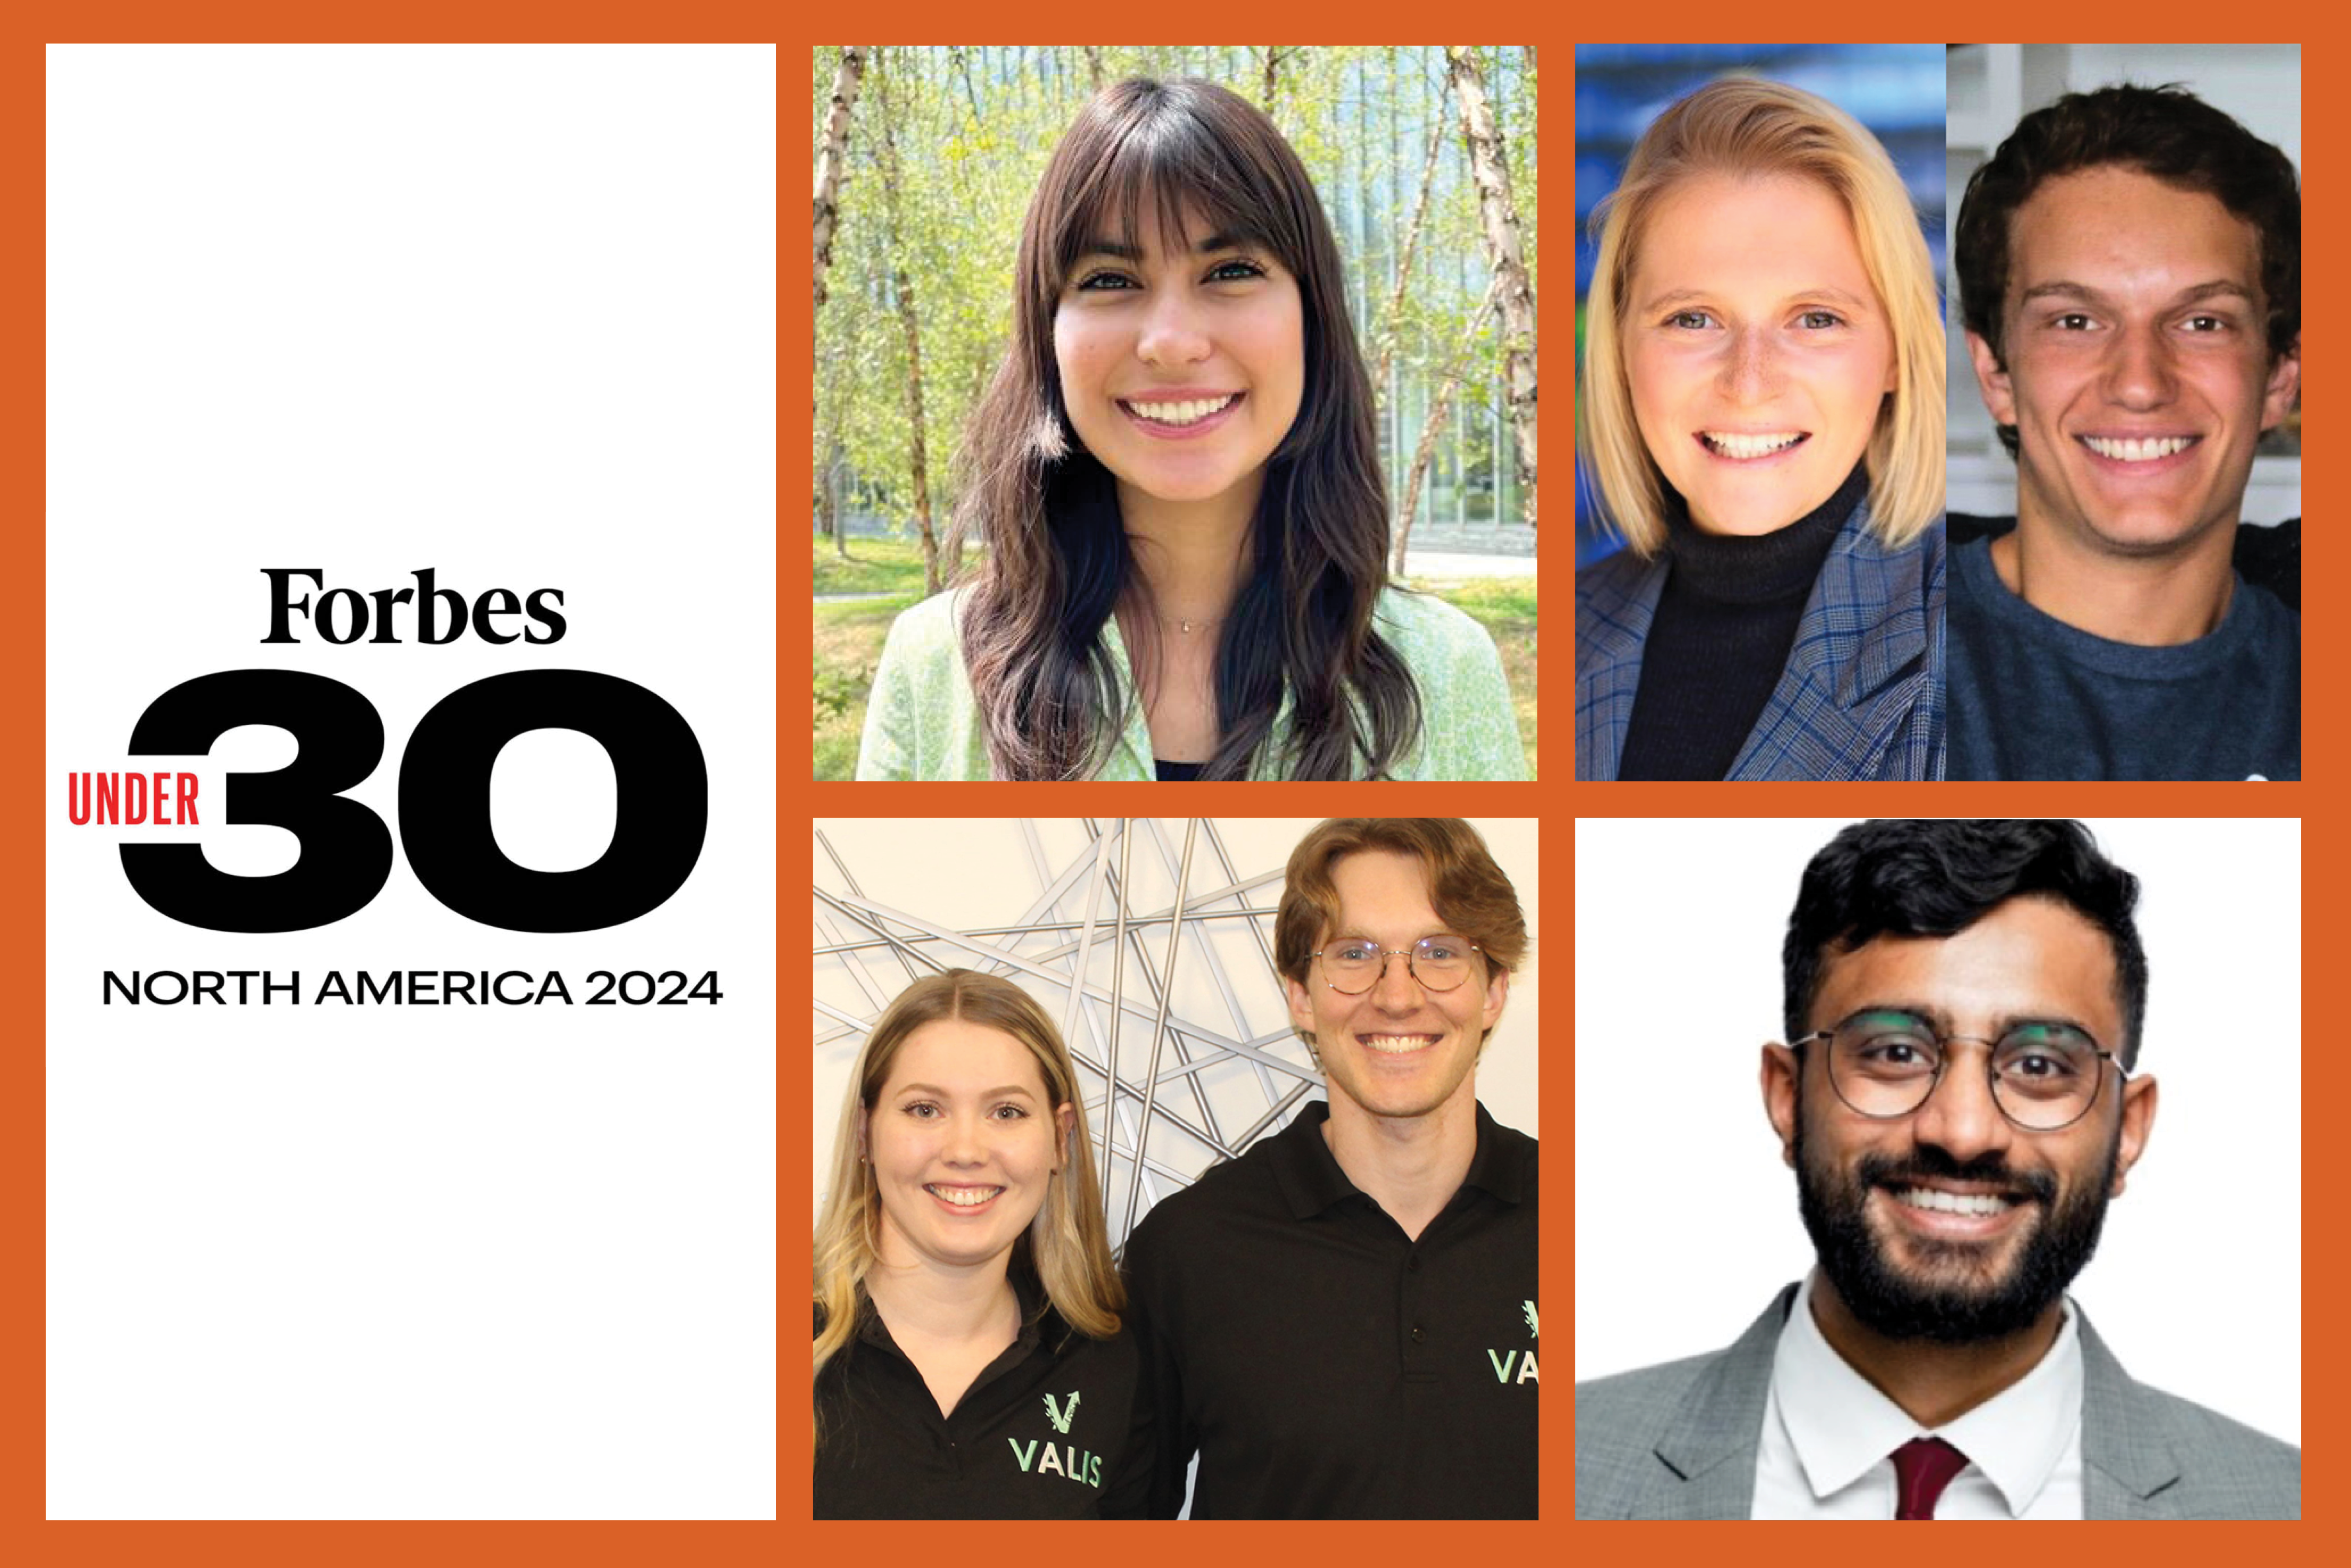 Forbes’ 30 under 30 2024; photos of the featured VentureWell innovators